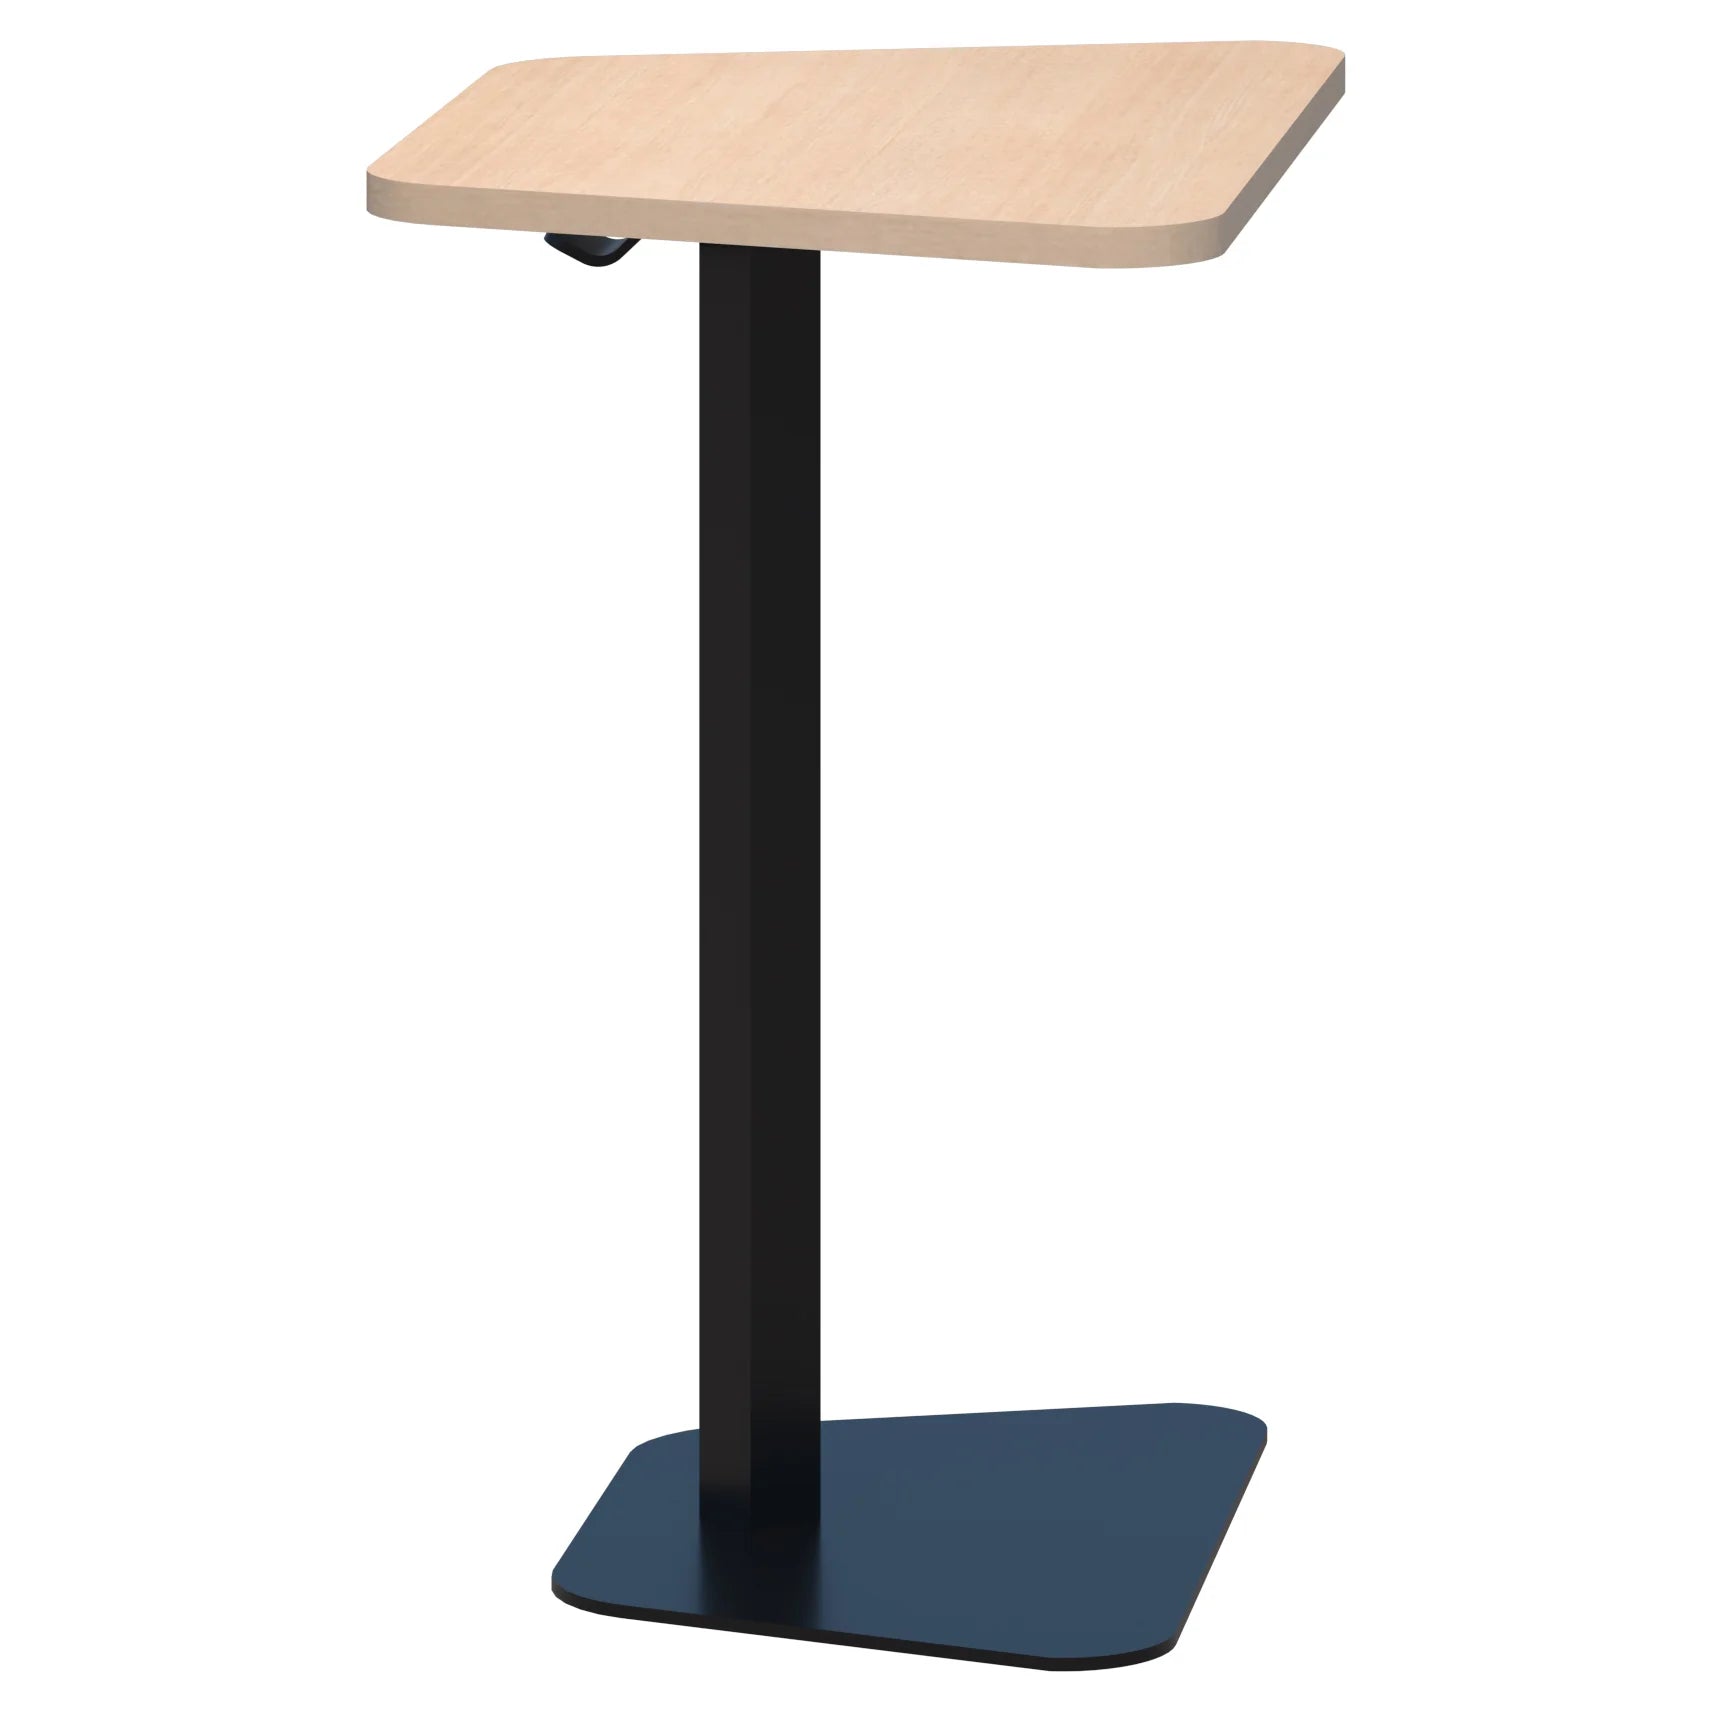 Memo laptop table with trapezium shaped top in refined oak and black pedestal base.